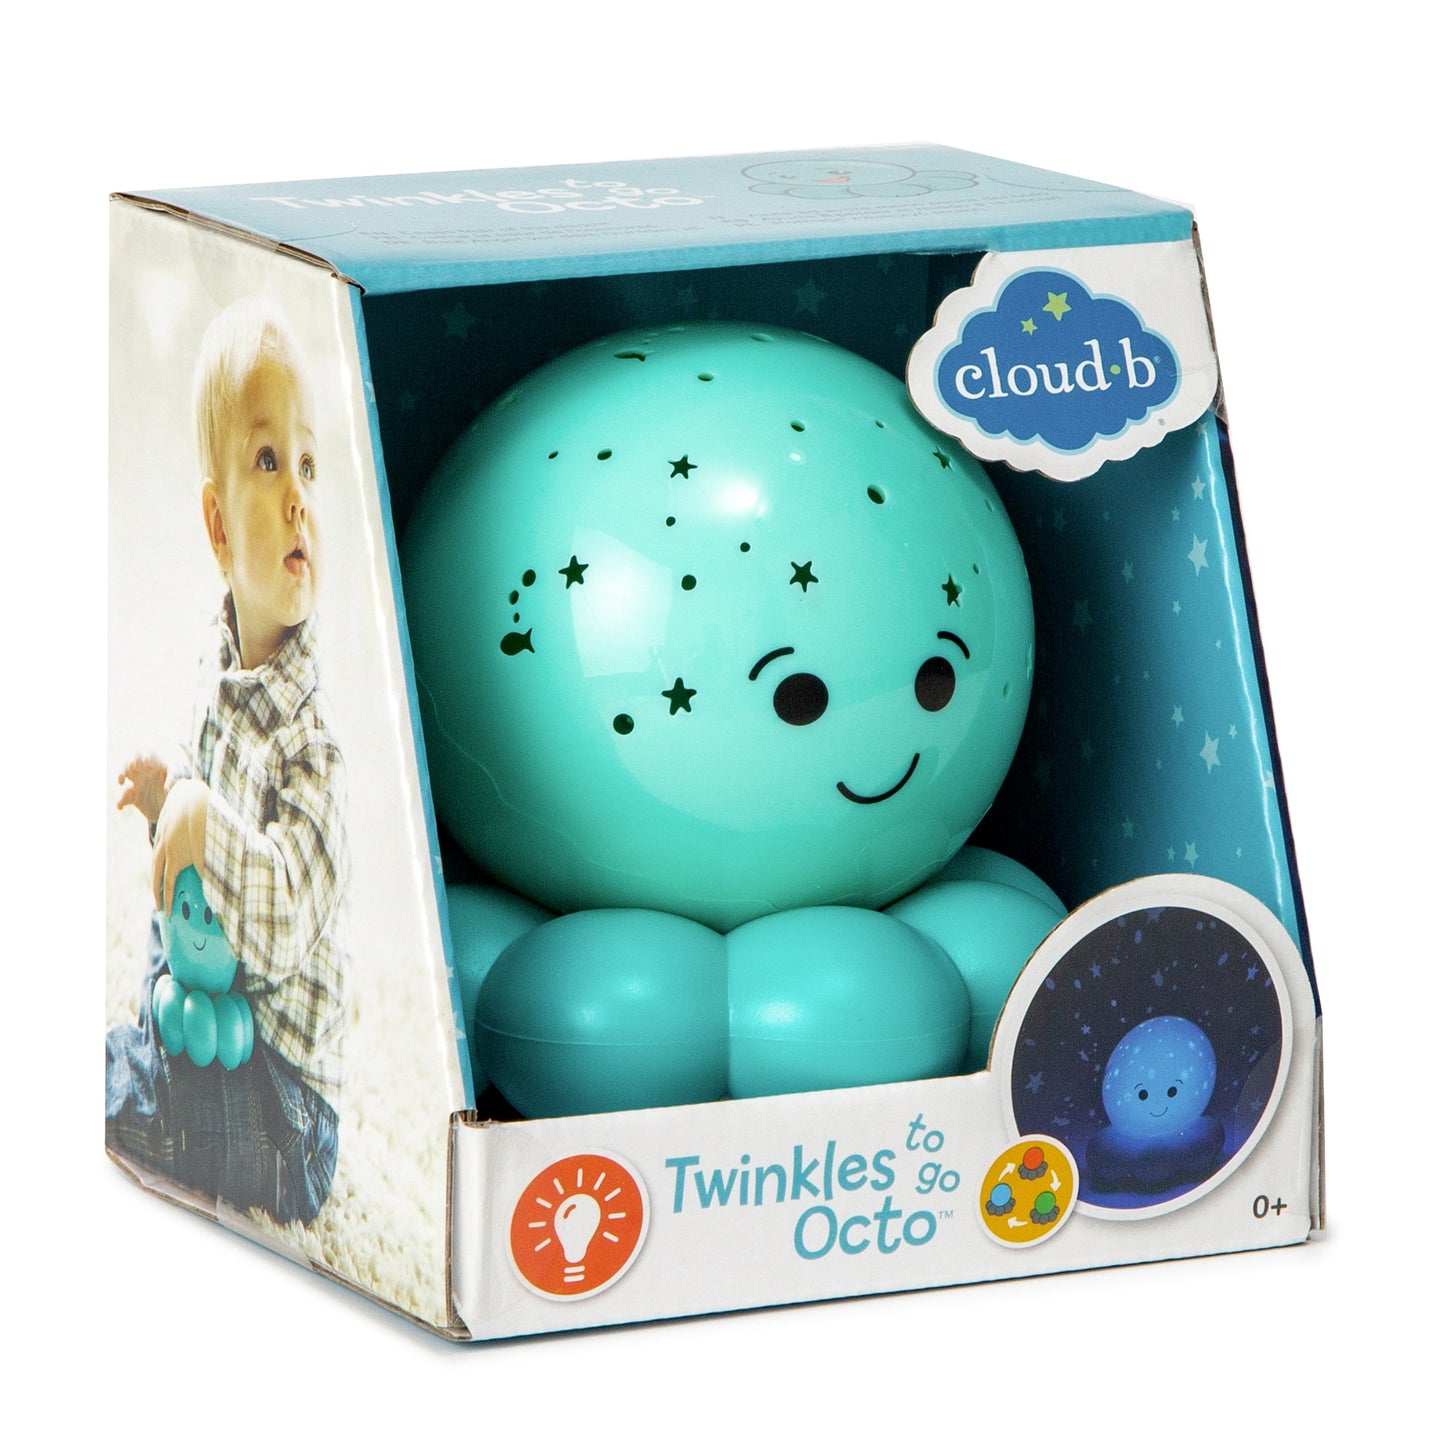 Twinkles To Go Octo™ - Veilleuse bleue à projection